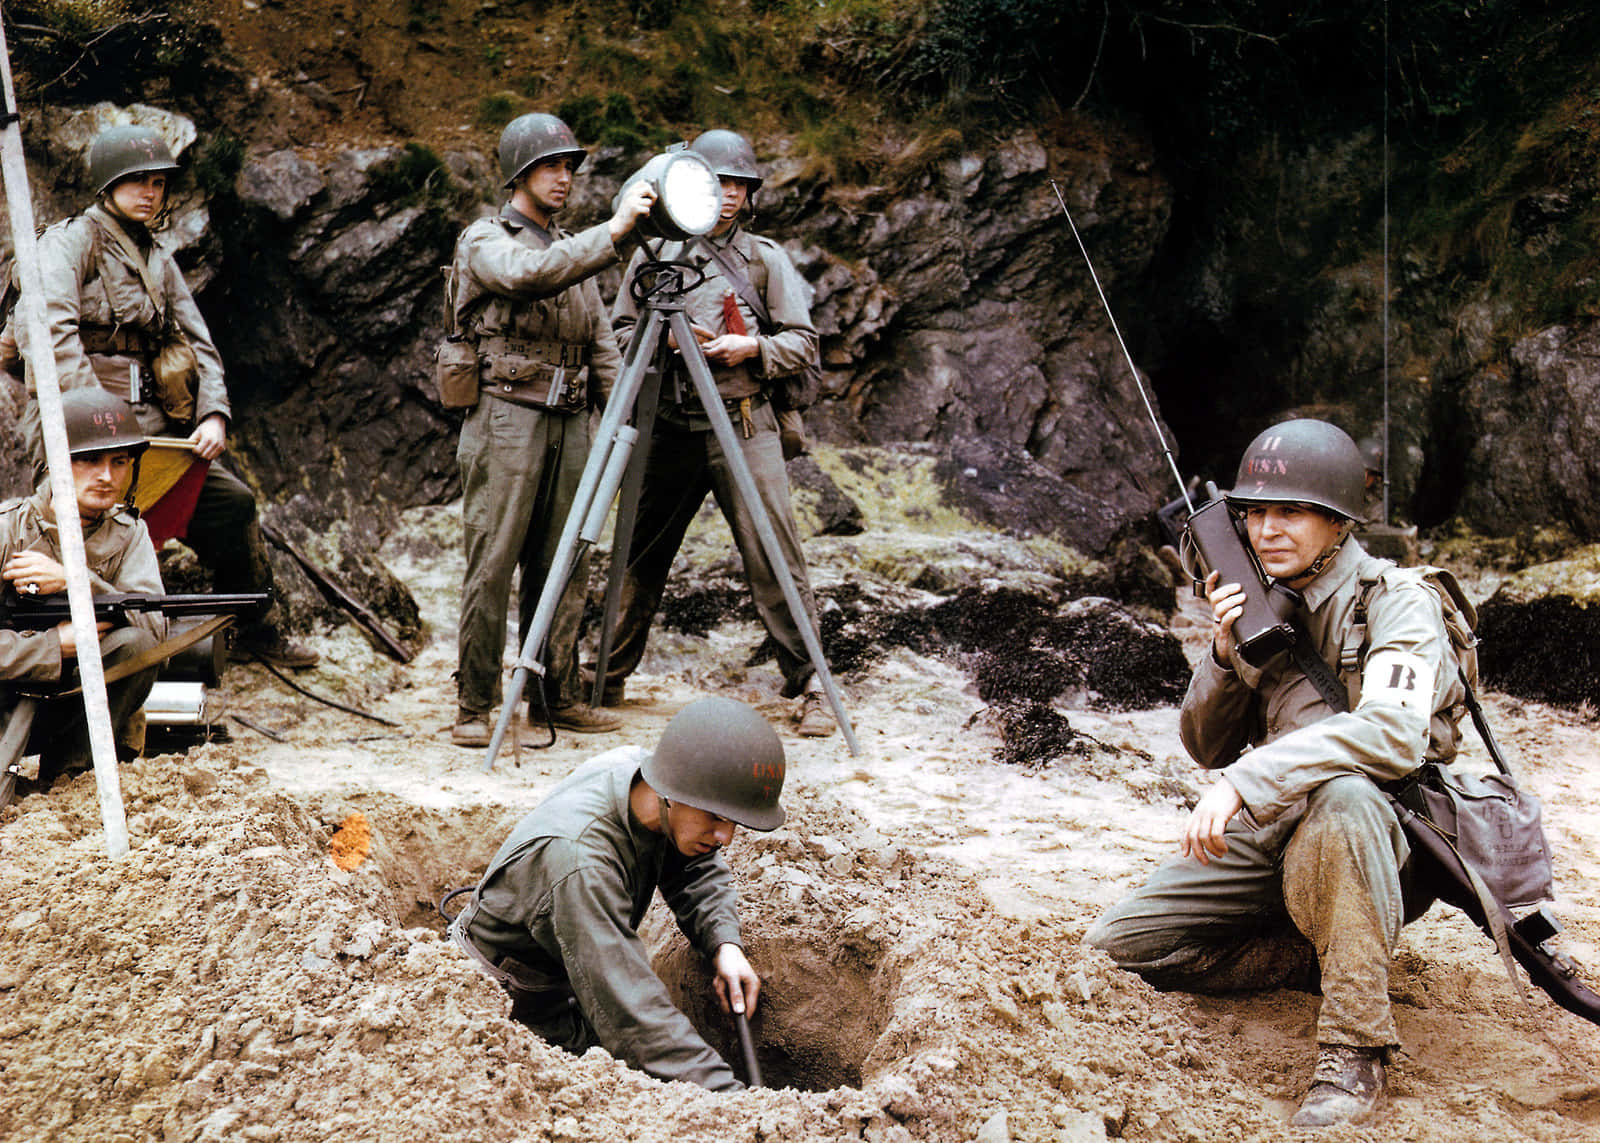 A Group Of Soldiers Are Digging In The Dirt